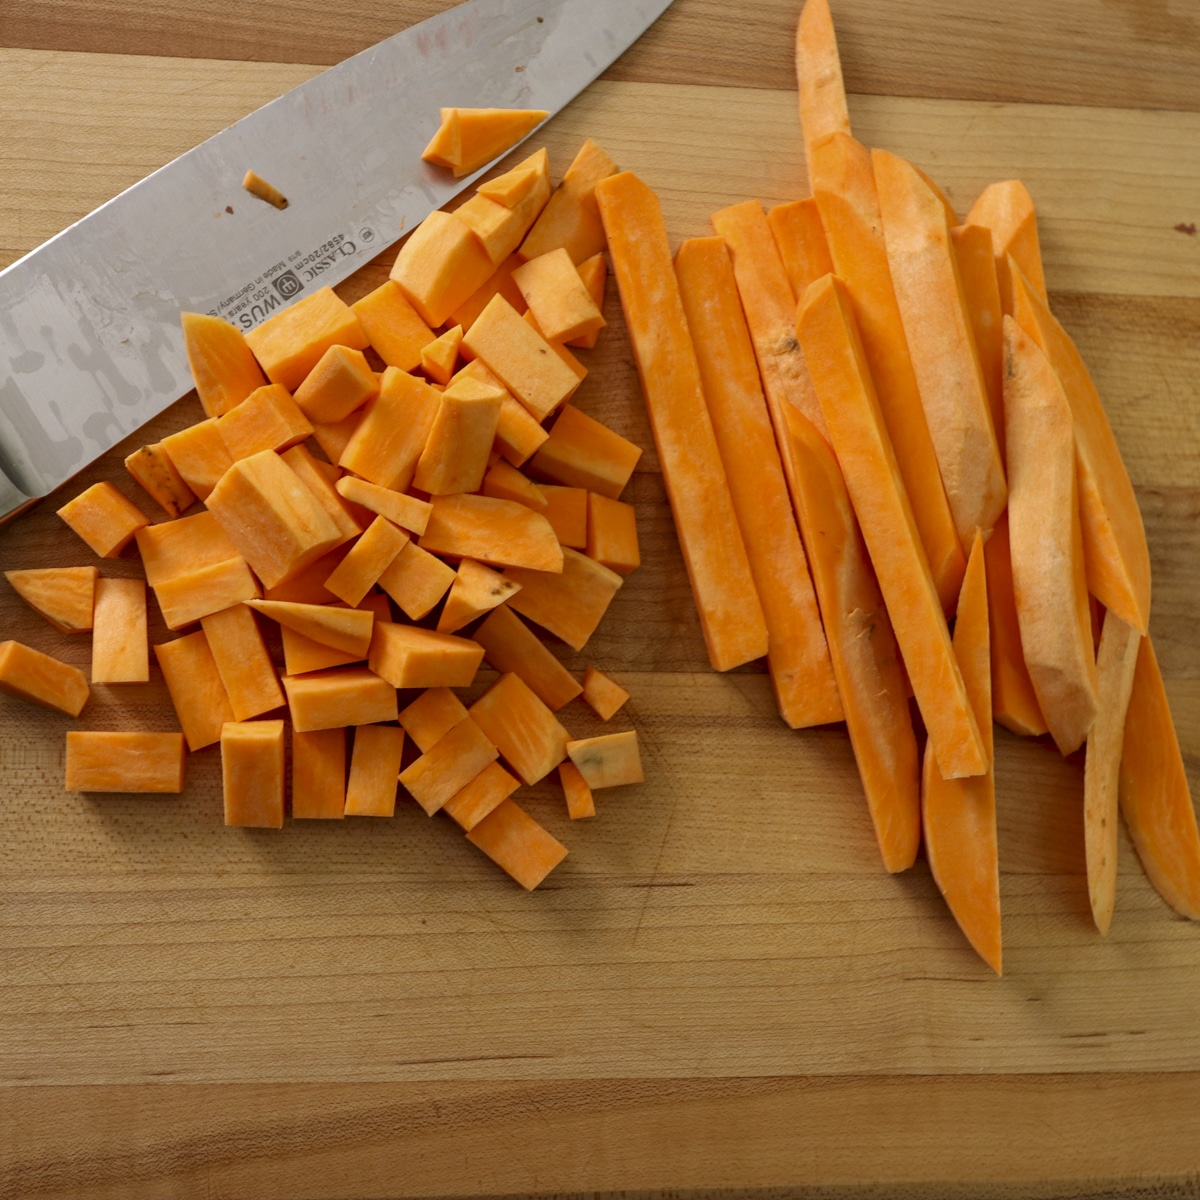 Freshly cut sweet potatoes on cutting board with a chef knife.